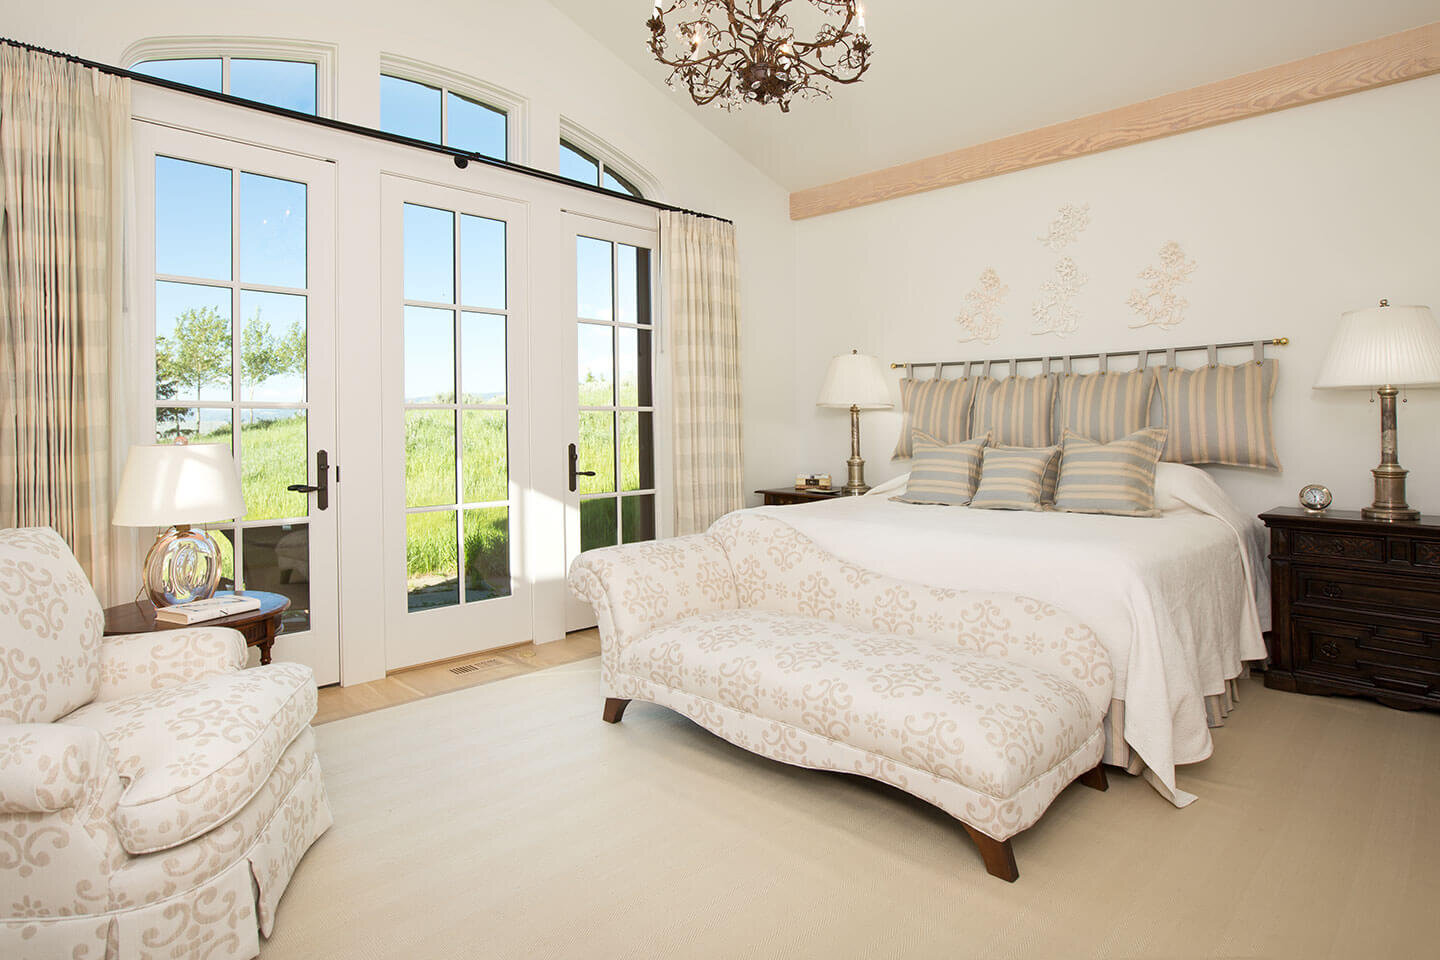 Renaissance style bedroom with ivory white palette and French windows